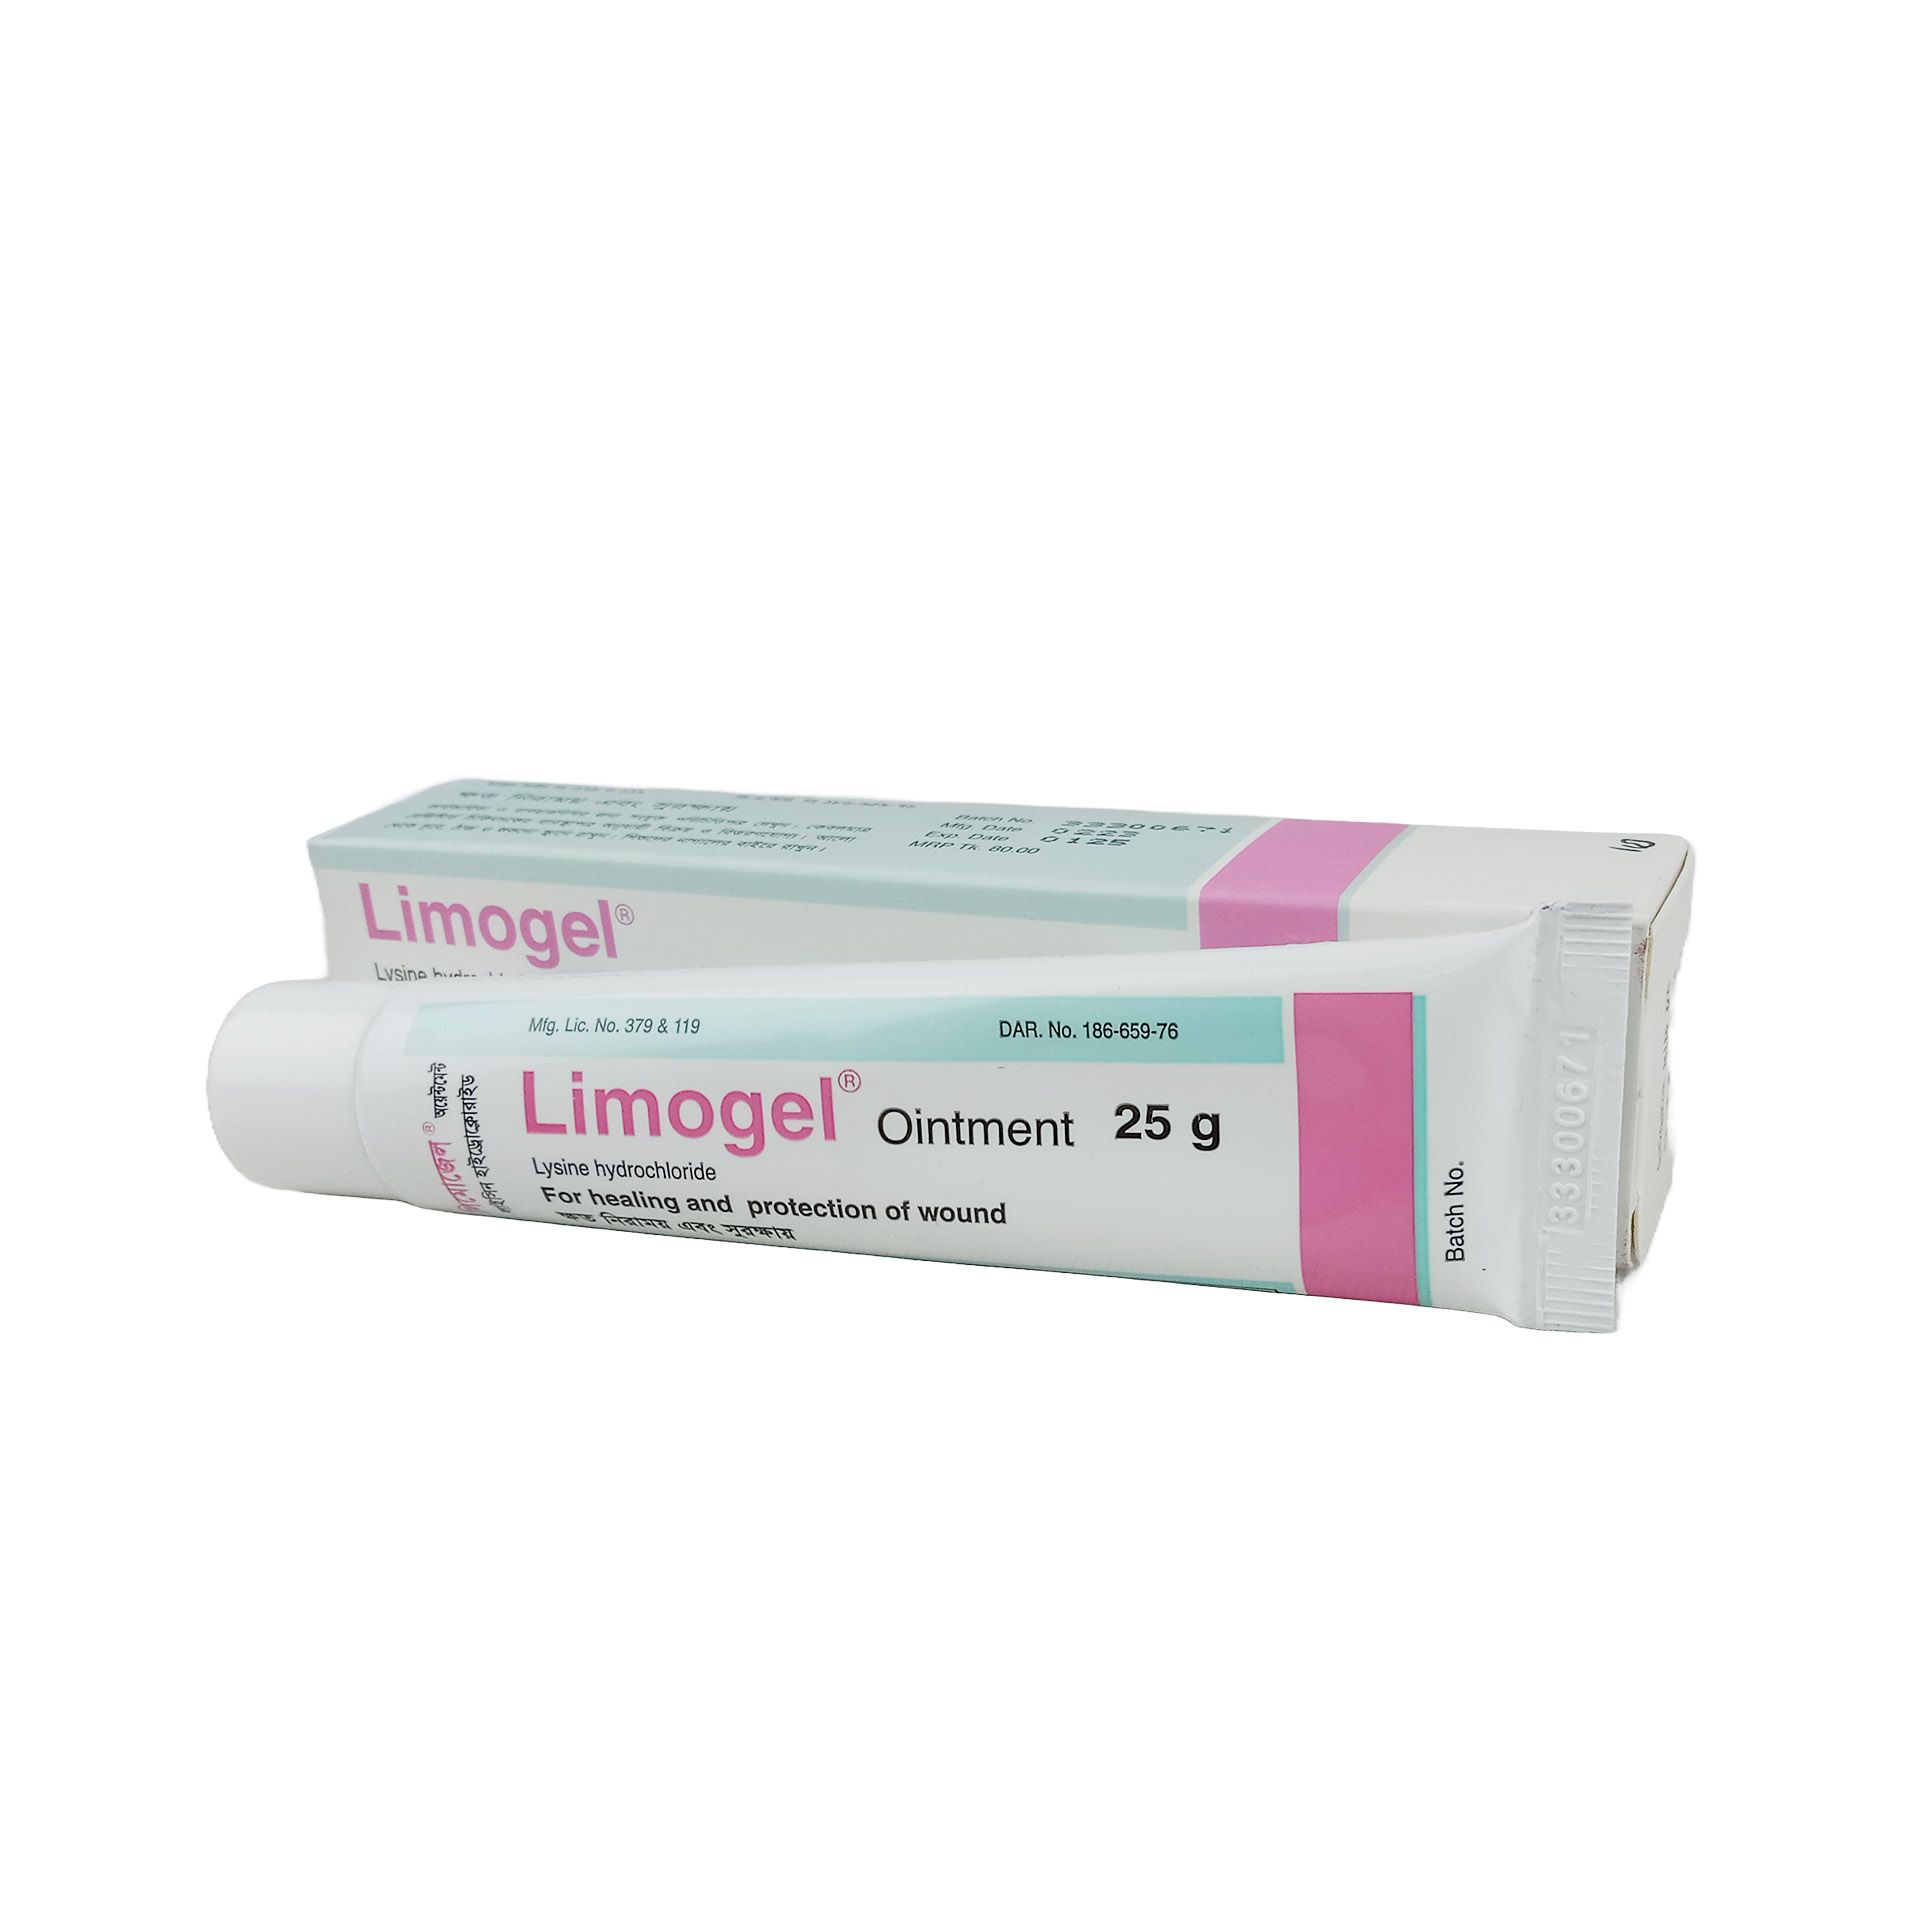 Limogel 15% Ointment